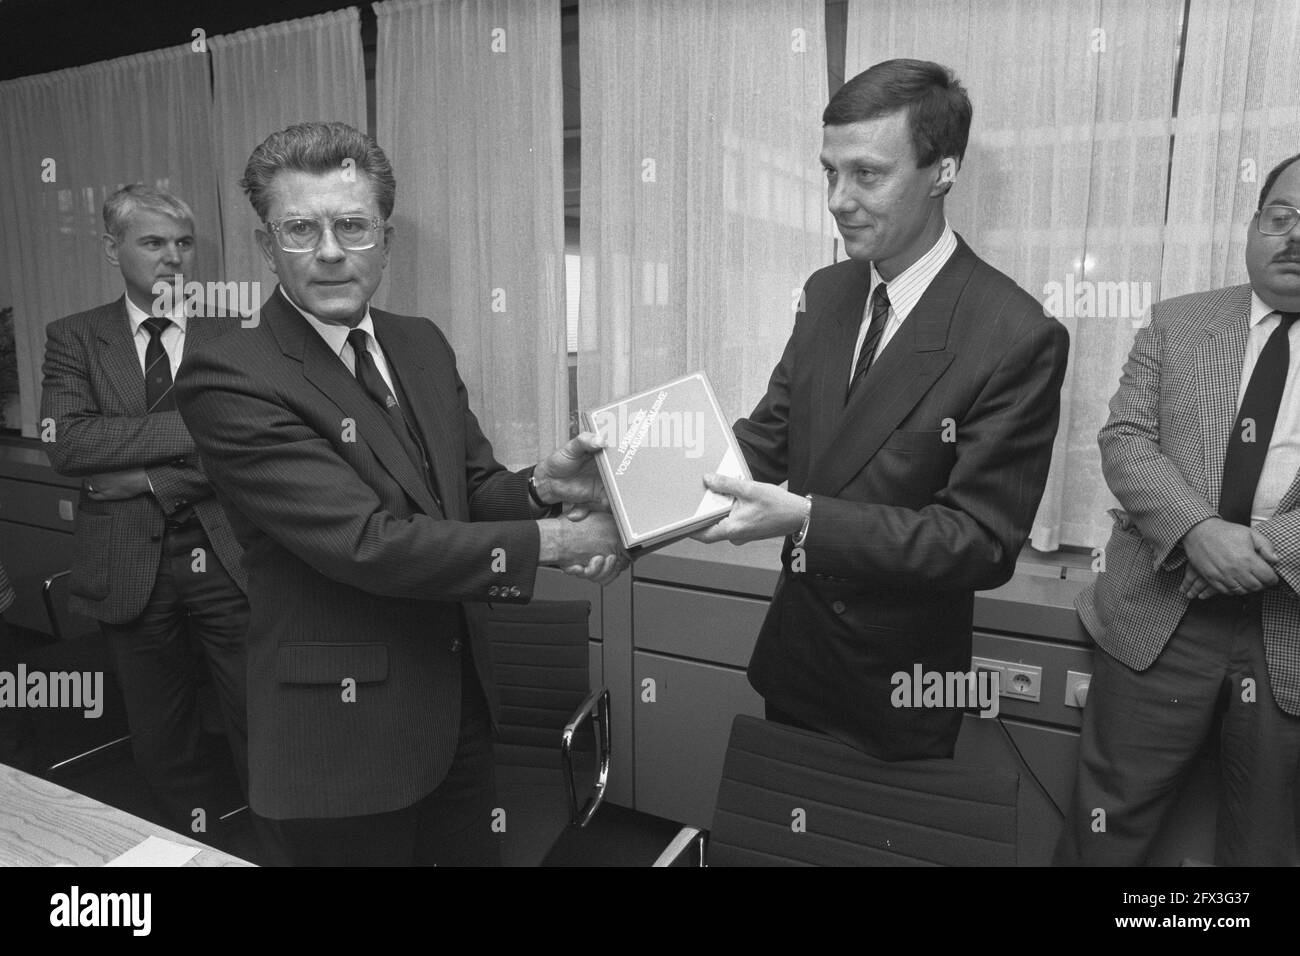 Minister Van Dijk (l) receives Handbook of soccer hooliganism from police commander P. Vogelzang, November 5, 1987, receipts, The Netherlands, 20th century press agency photo, news to remember, documentary, historic photography 1945-1990, visual stories, human history of the Twentieth Century, capturing moments in time Stock Photo